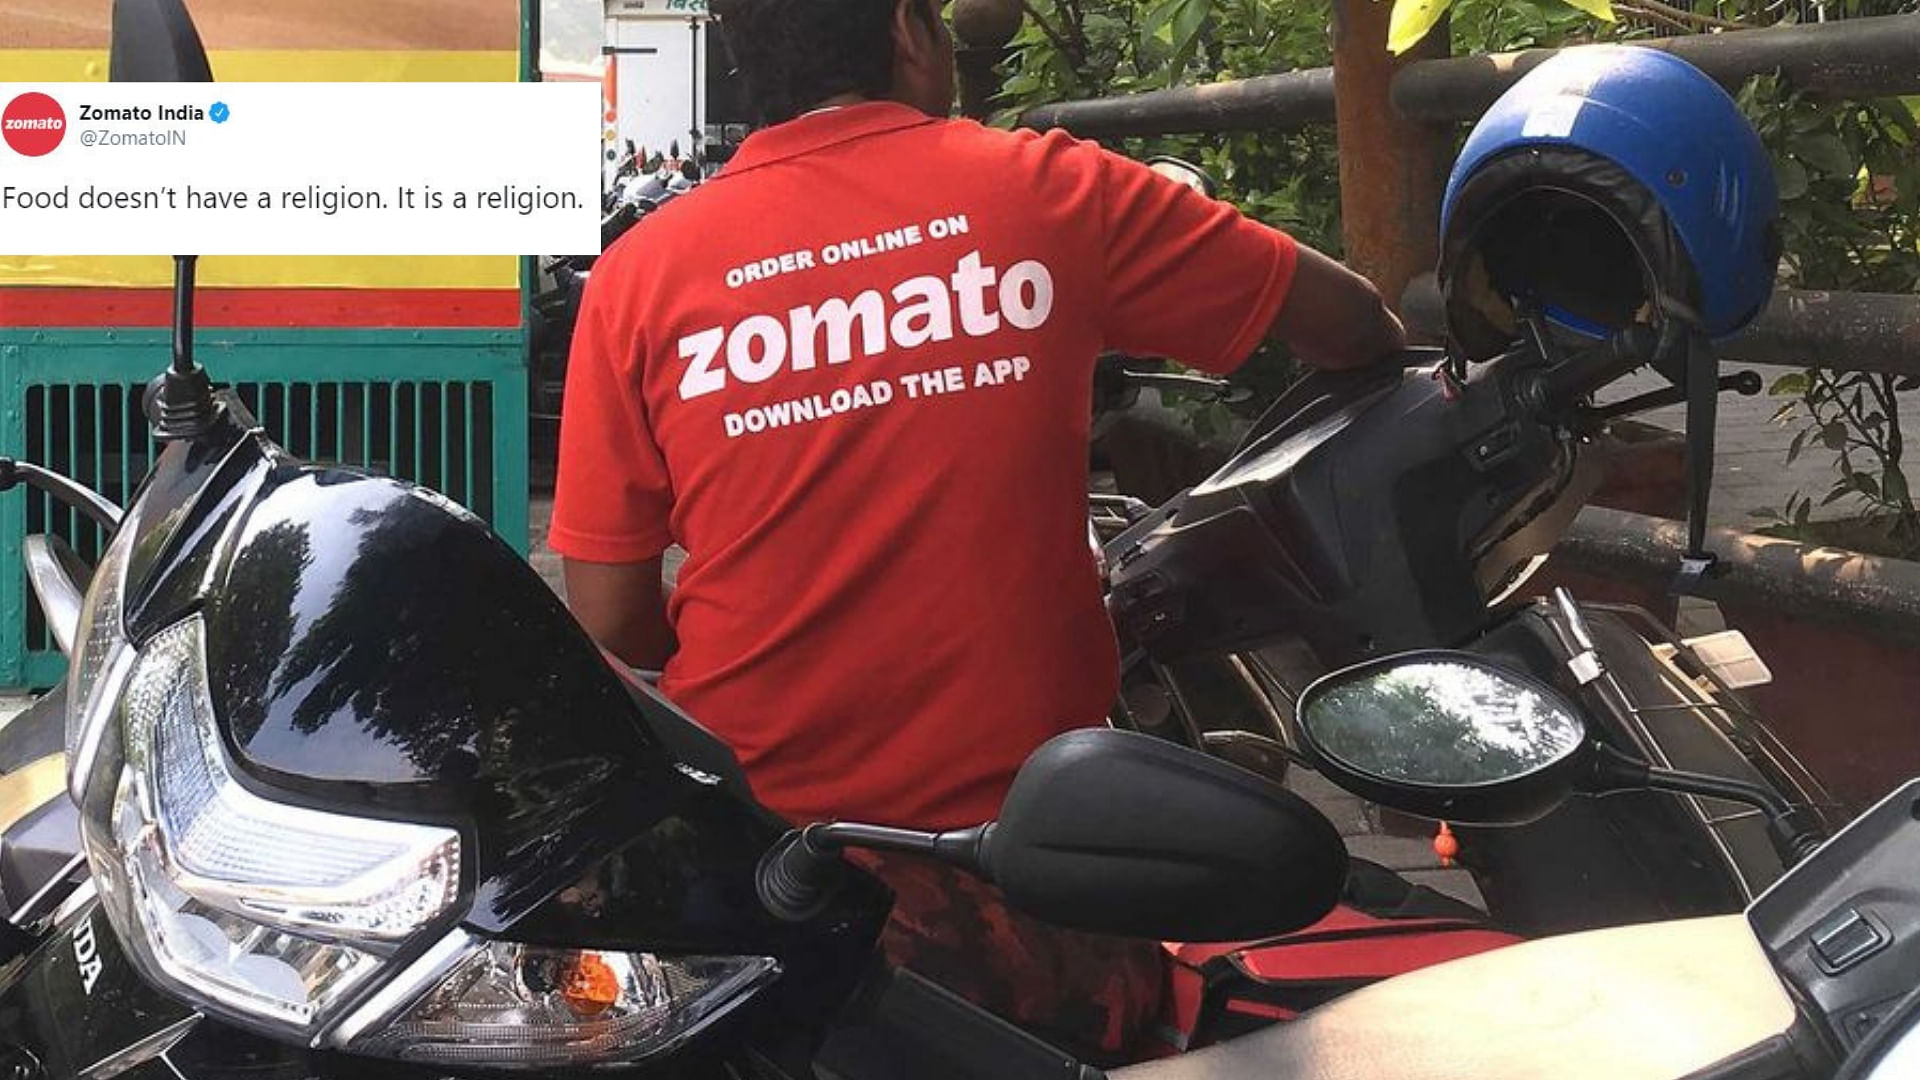 “Food has no religion,” responded Zomato to a controversial post.